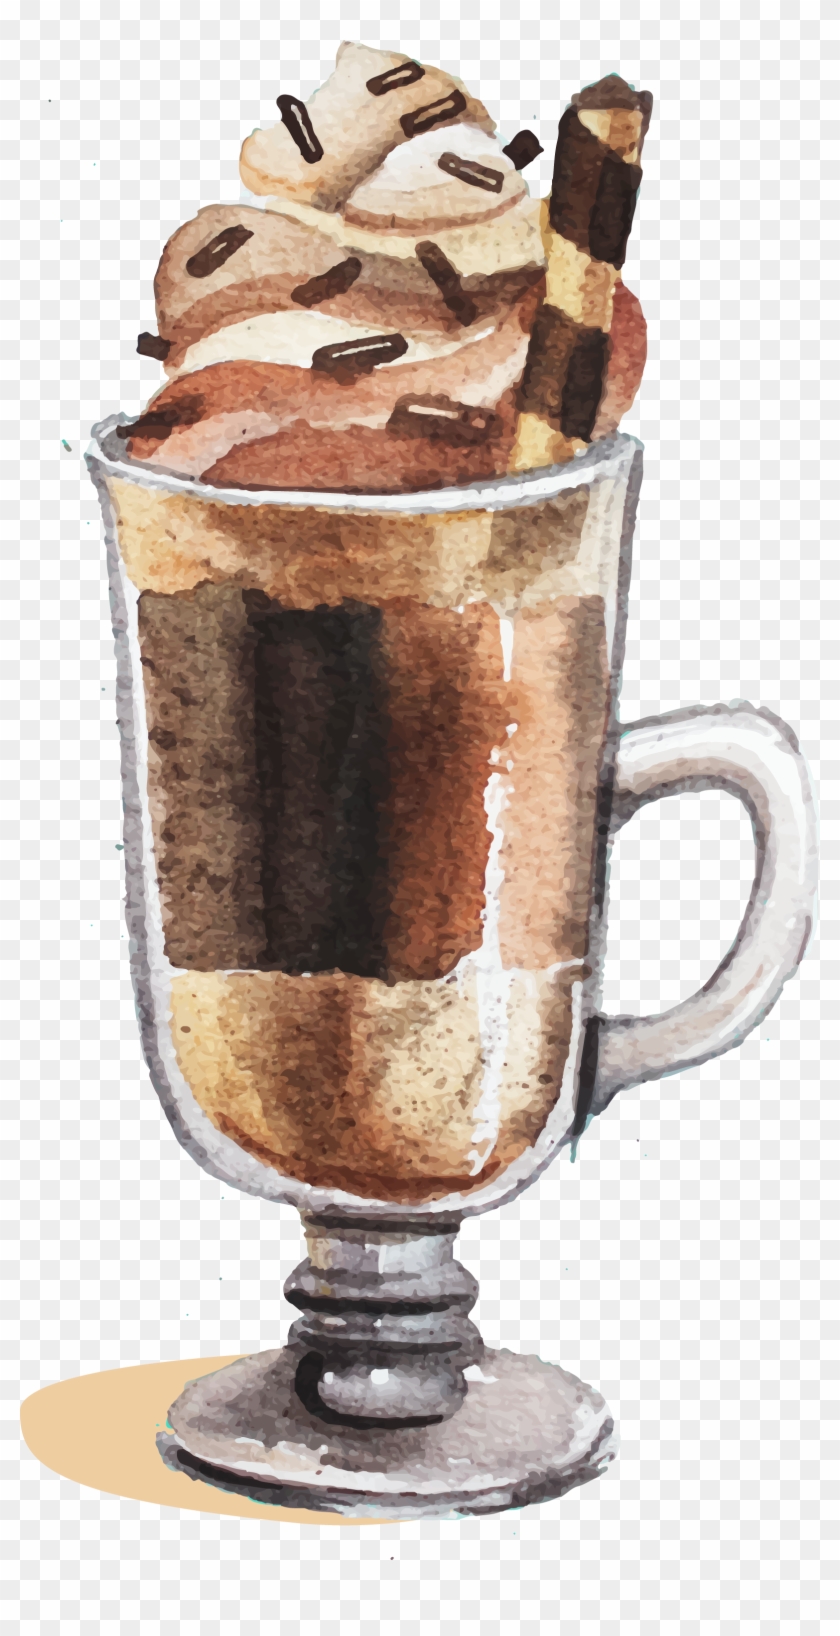 Free Png Download Hot Cup Chocolate Png Images Background - Food Dessert Watercolor Png Clipart #222533